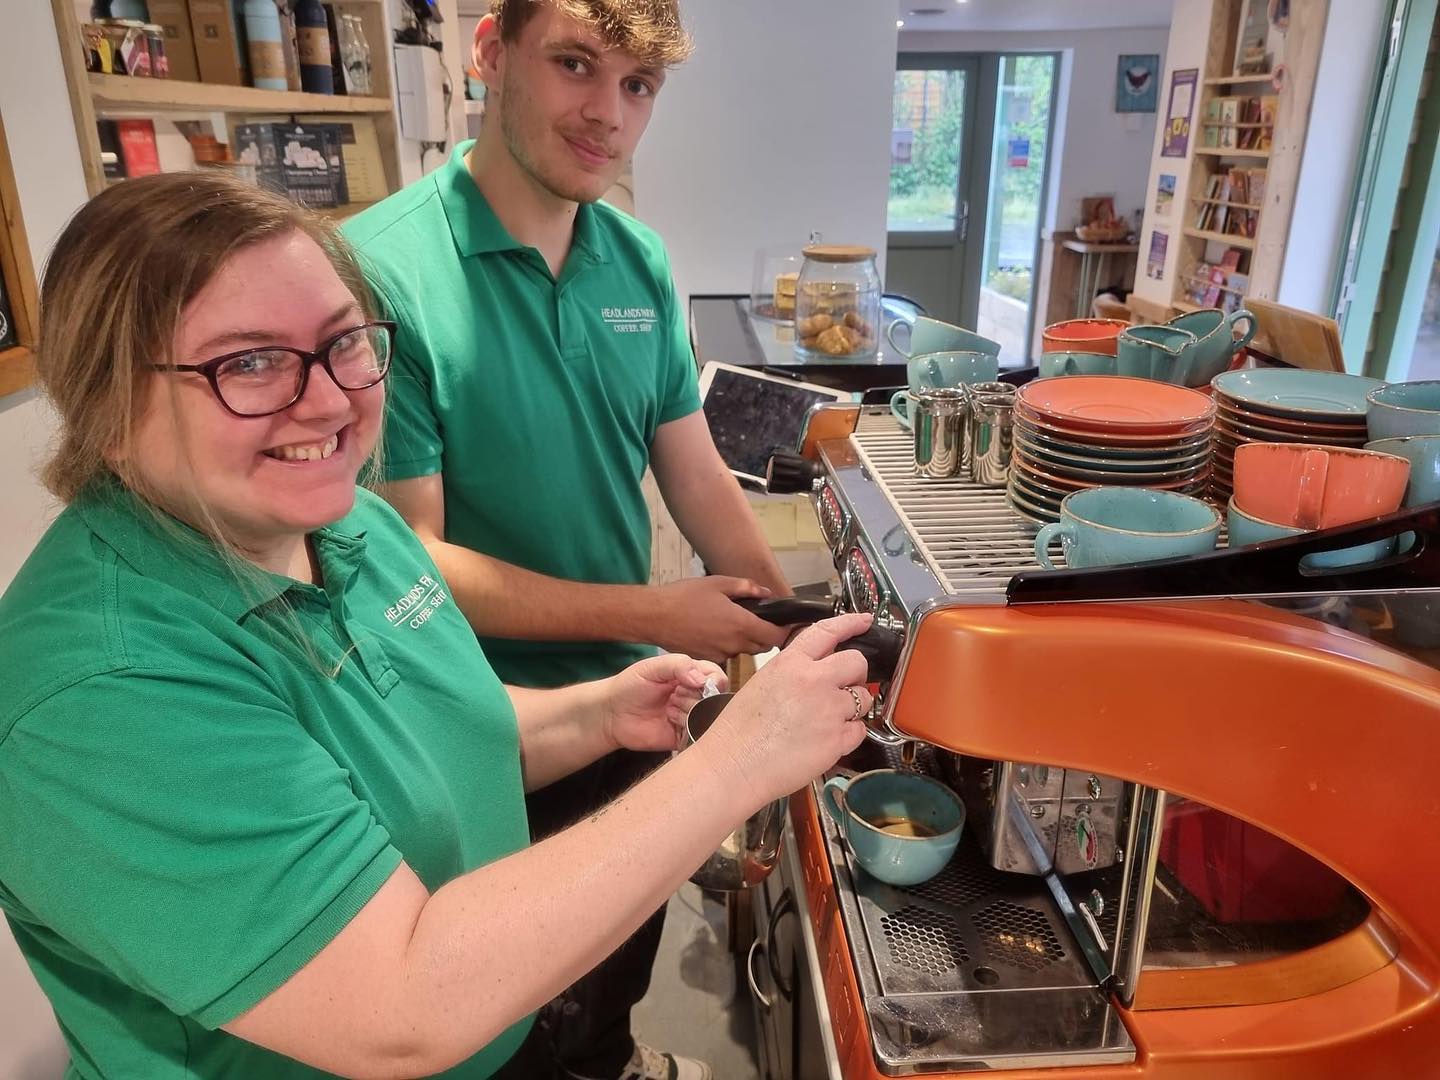 Whilst the weather has been temperamental today our amazing baristas in training have been hard at work perfecting their coffees! 

All our staff are individually trained to make sure your coffee is perfect each time!

#headlandsfarmcoffeeshop #coffeeshopinwellow #baristalife #freshcoffee